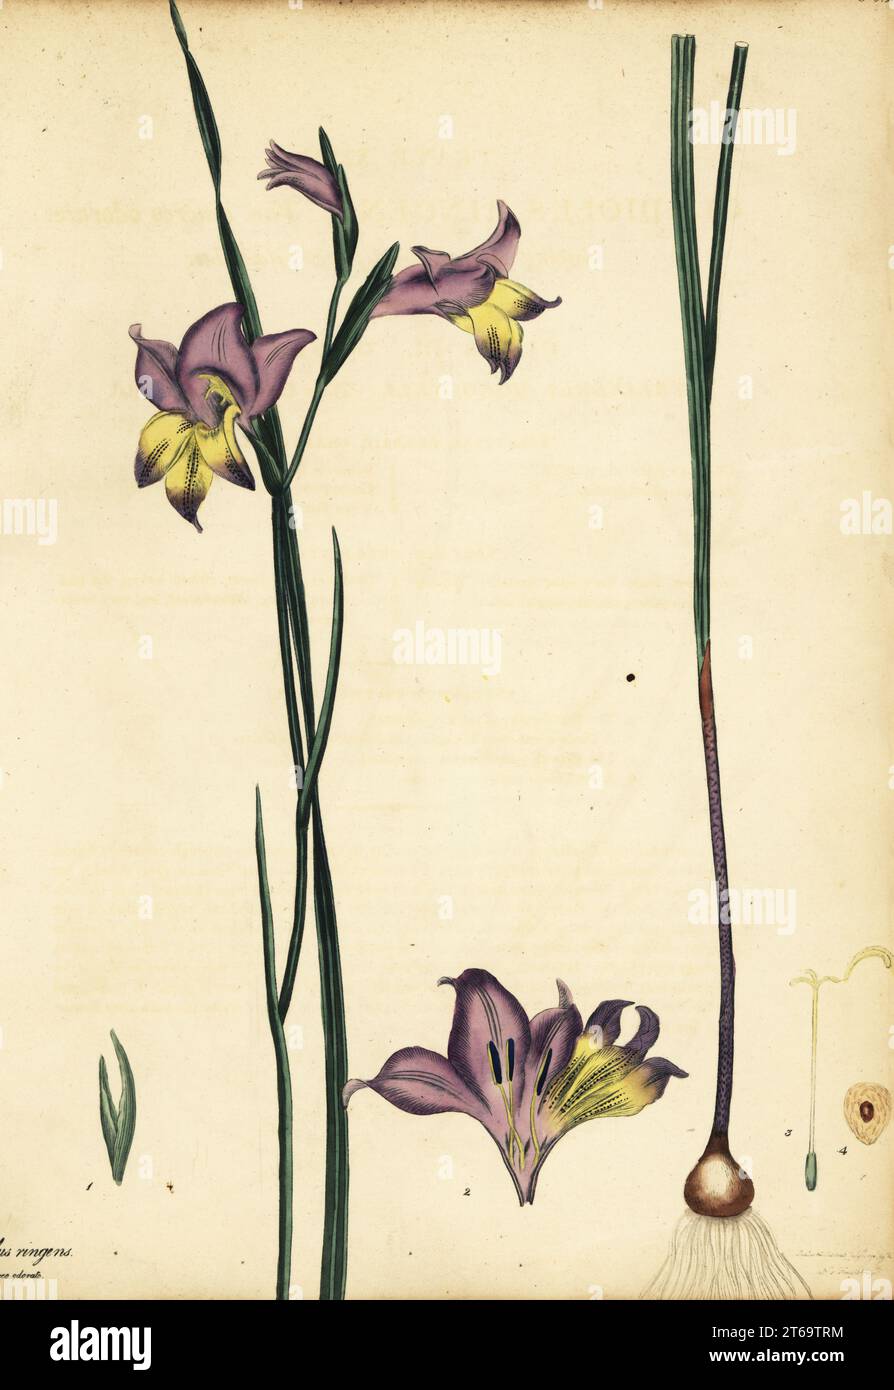 Blue Afrikaner, Gladiolus carinatus. Gaping ash-coloured sweet gladiolus, Gladiolus ringens var. cenereo odorata. Copperplate engraving drawn, engraved and hand-coloured by Henry Andrews from his Botanical Register, Volume 1, published in London, 1799. Stock Photo